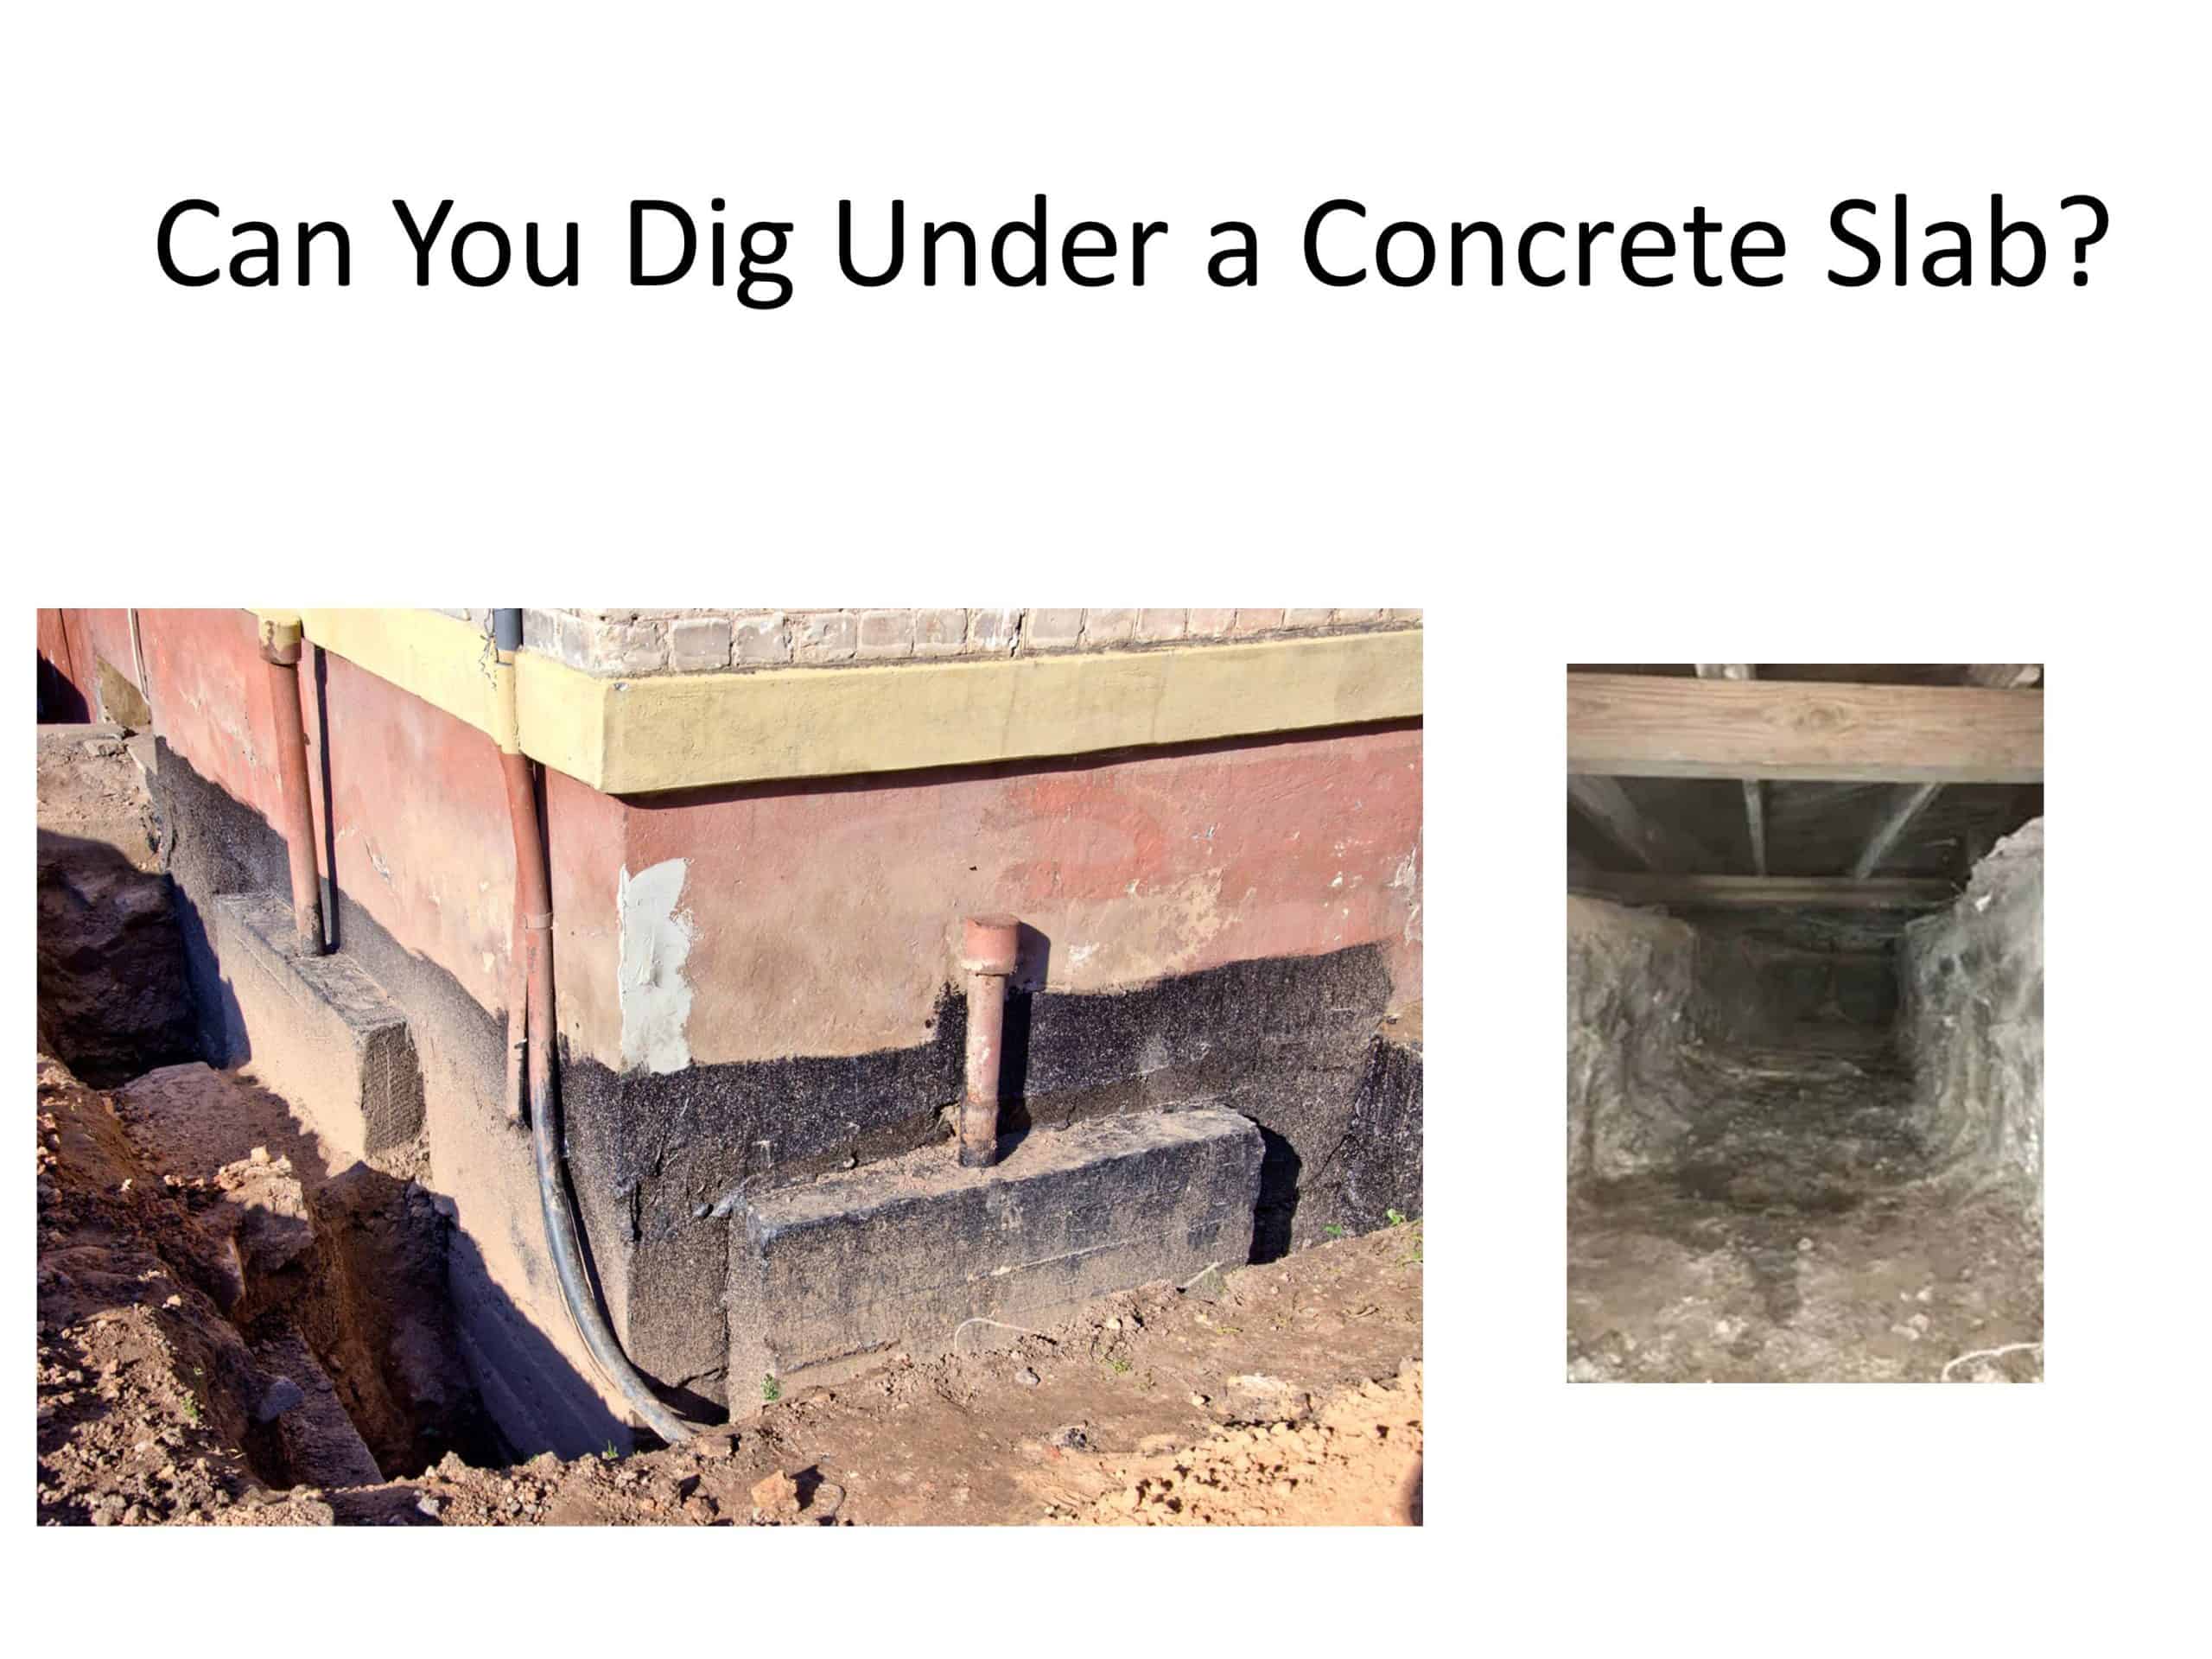 Can You Dig Under a Concrete Slab